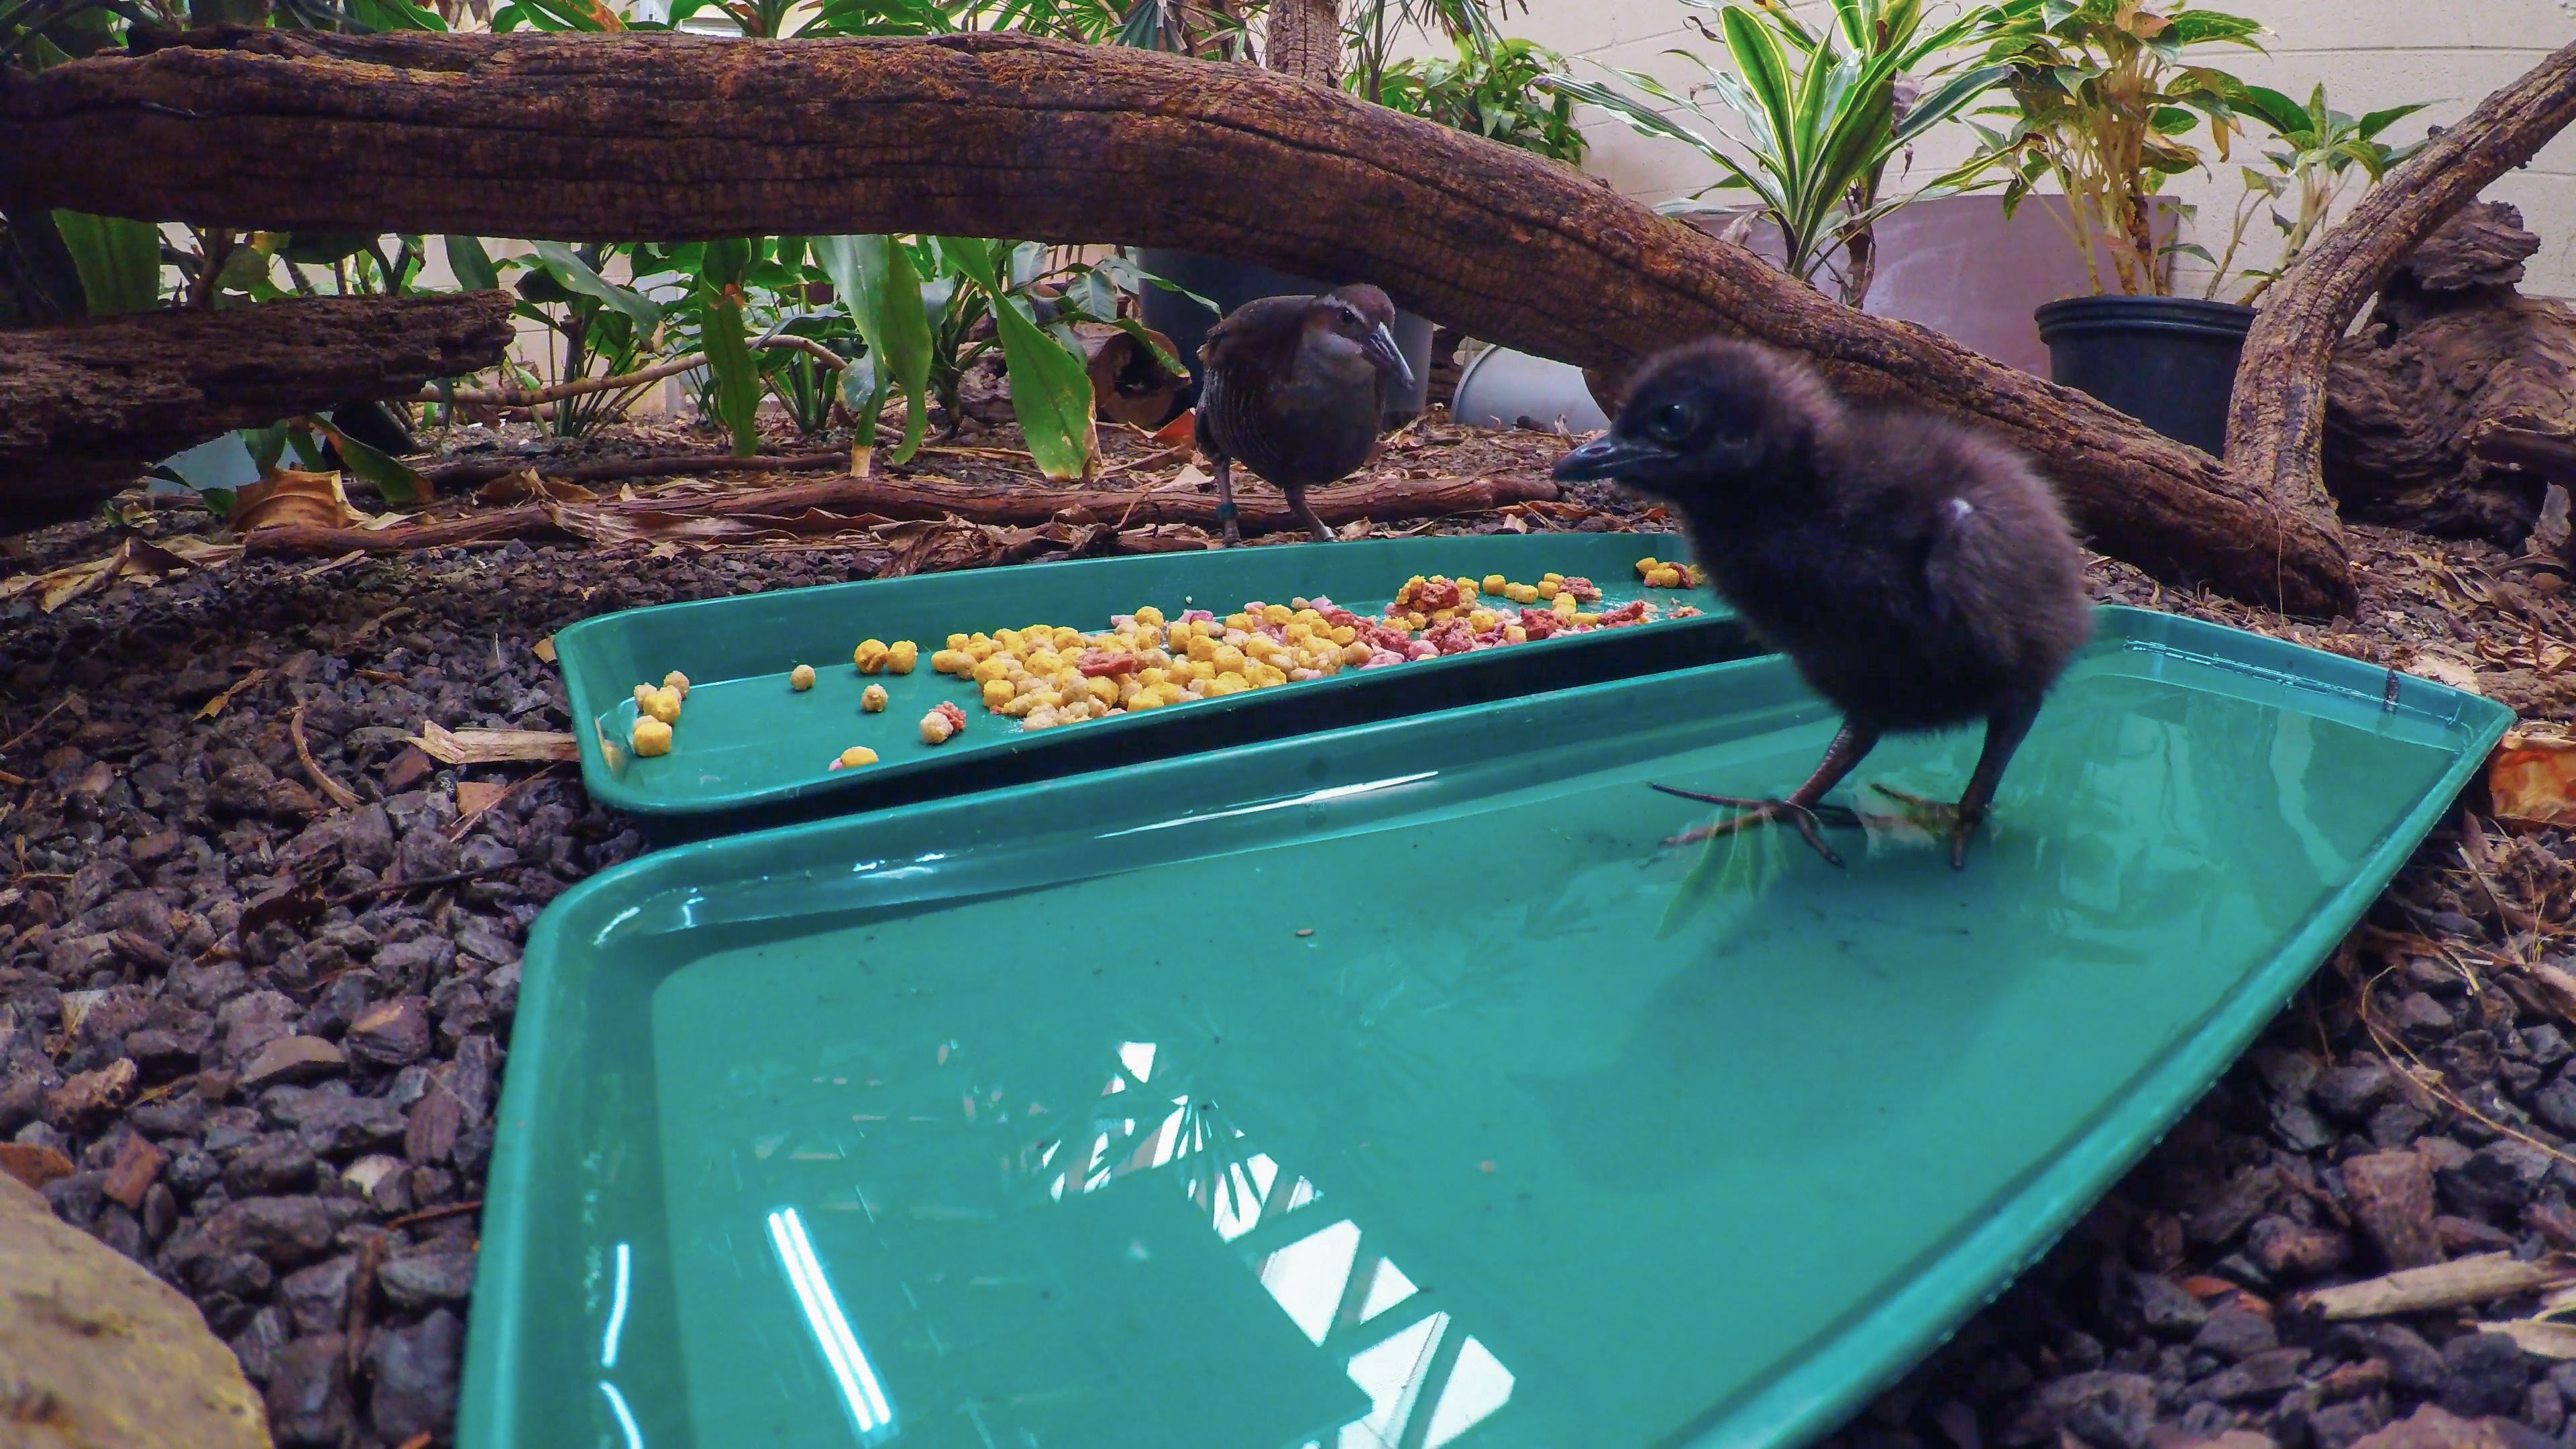 Guam rail chicks at the Smithsonian Conservation Biology Institute